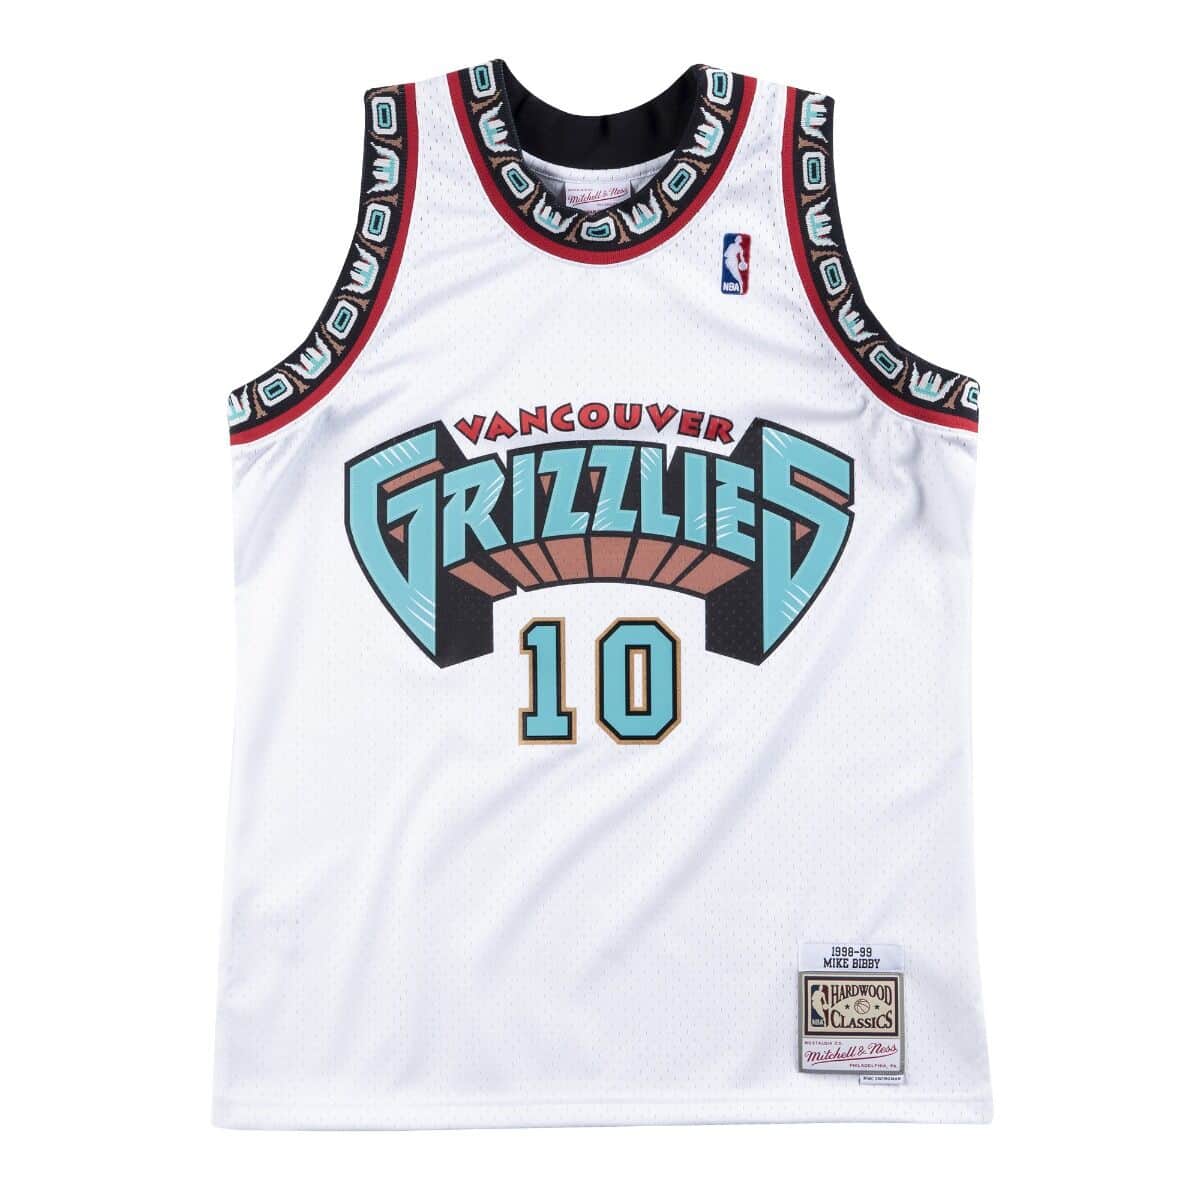 Vancouver Grizzlies Mike Bibby Mitchell and Ness Swingman Jersey - White